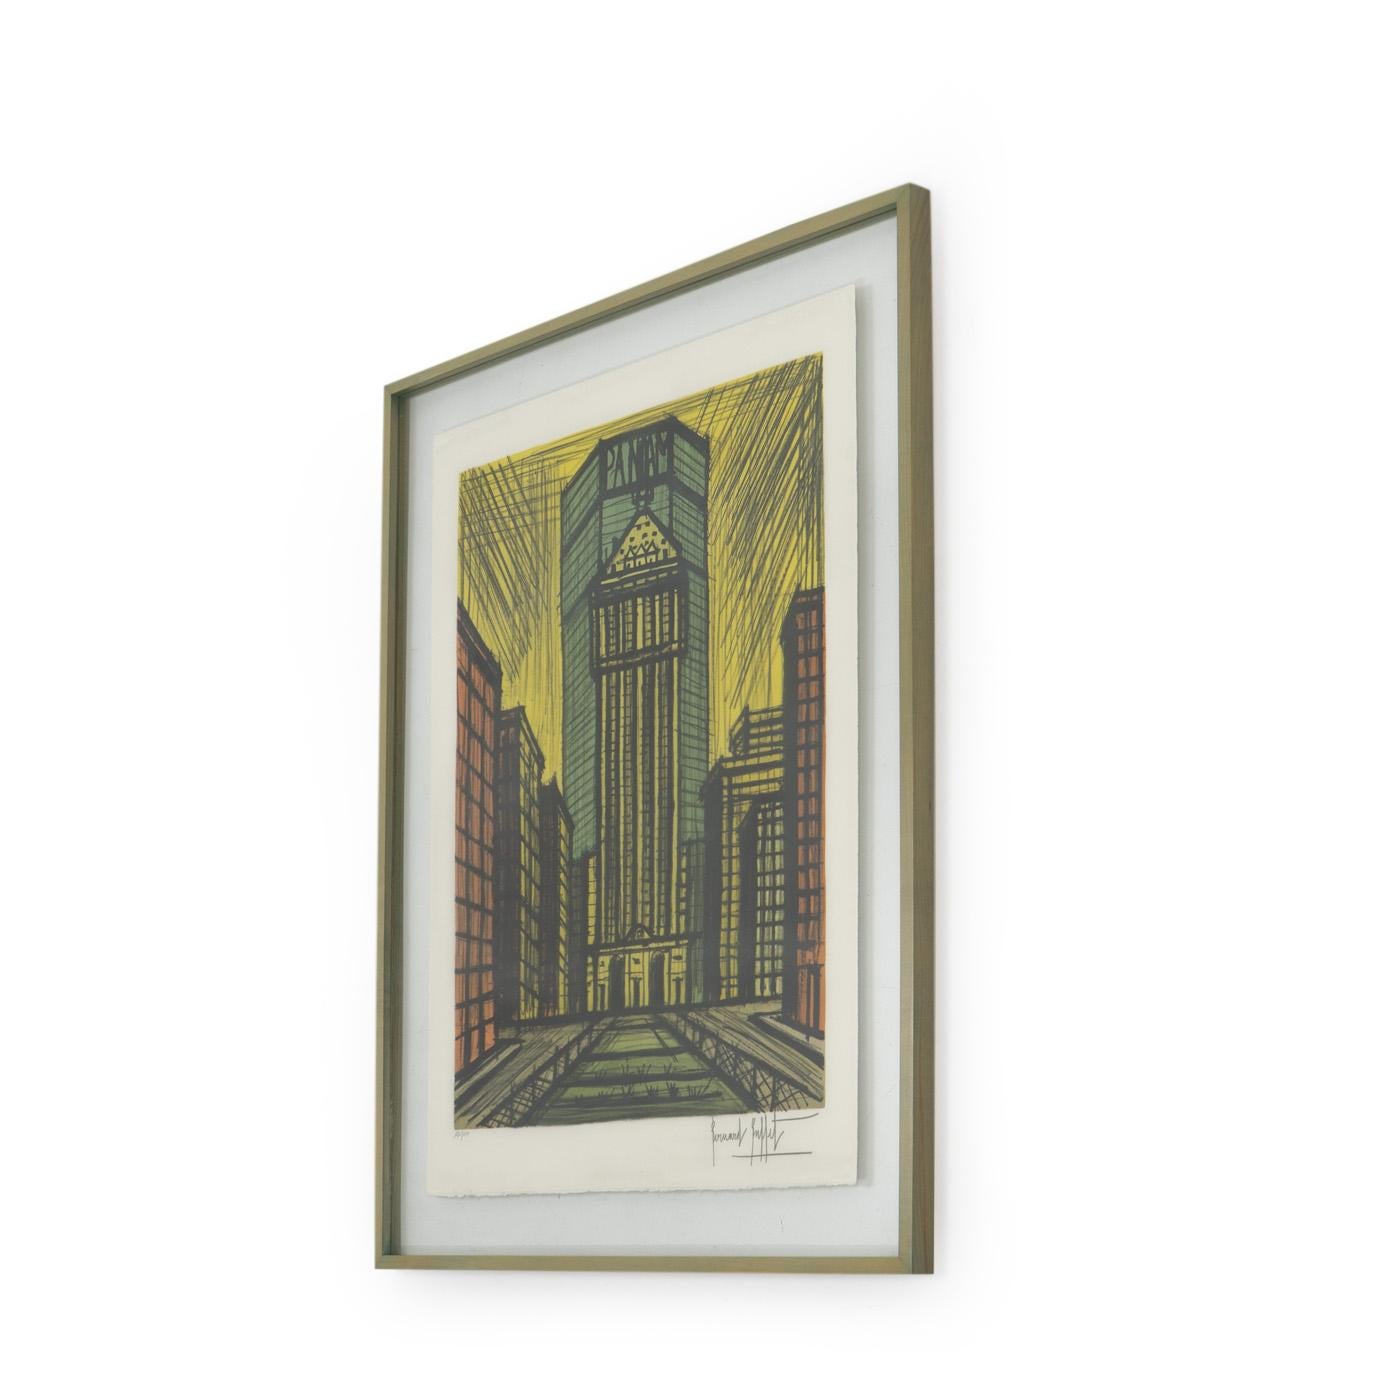 French Lithograph by Bernard Buffet “Panam” New York Landmark Building, Signed, 1980s For Sale